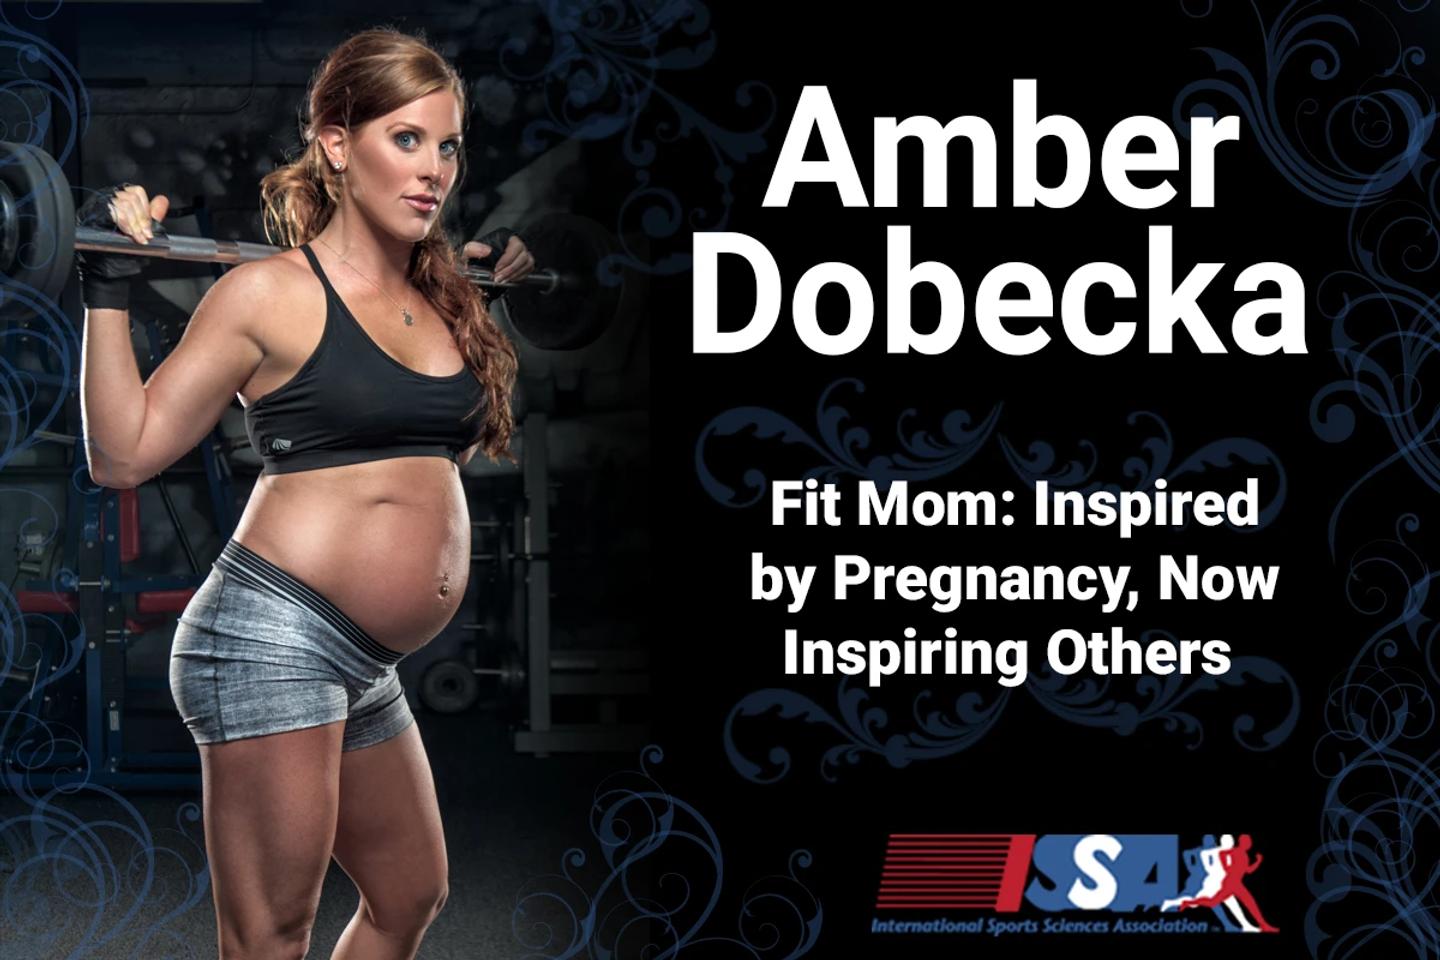 ISSA, International Sports Sciences Association, Certified Personal Trainer, ISSAonline, Fit Mom: Inspired by Pregnancy, Now Inspiring Others As Personal Trainer, Amber Dobecka